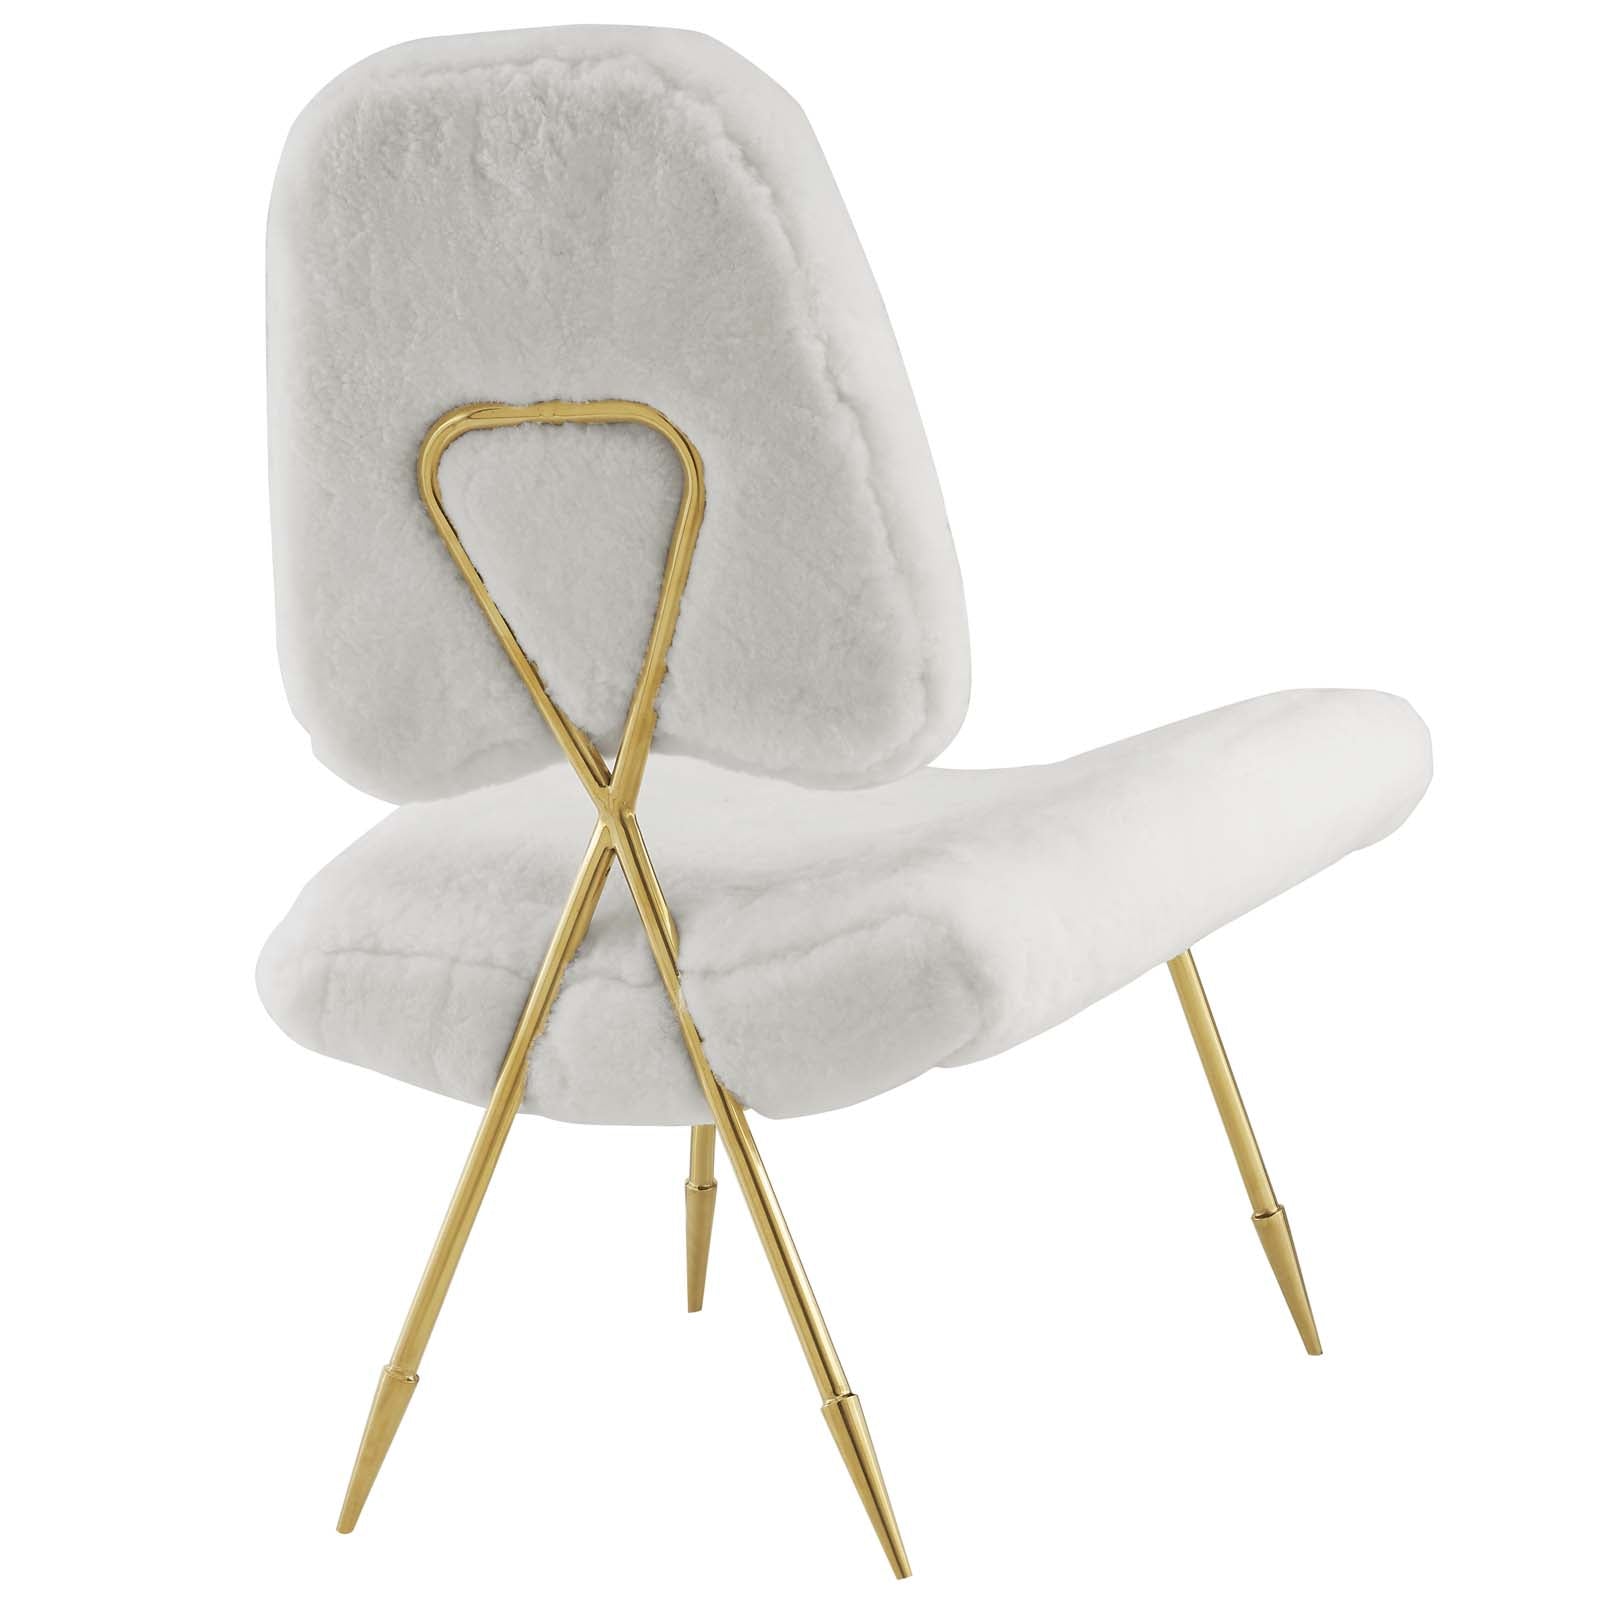 Modway Accent Chairs - Ponder Upholstered Sheepskin Fur Lounge Chair White